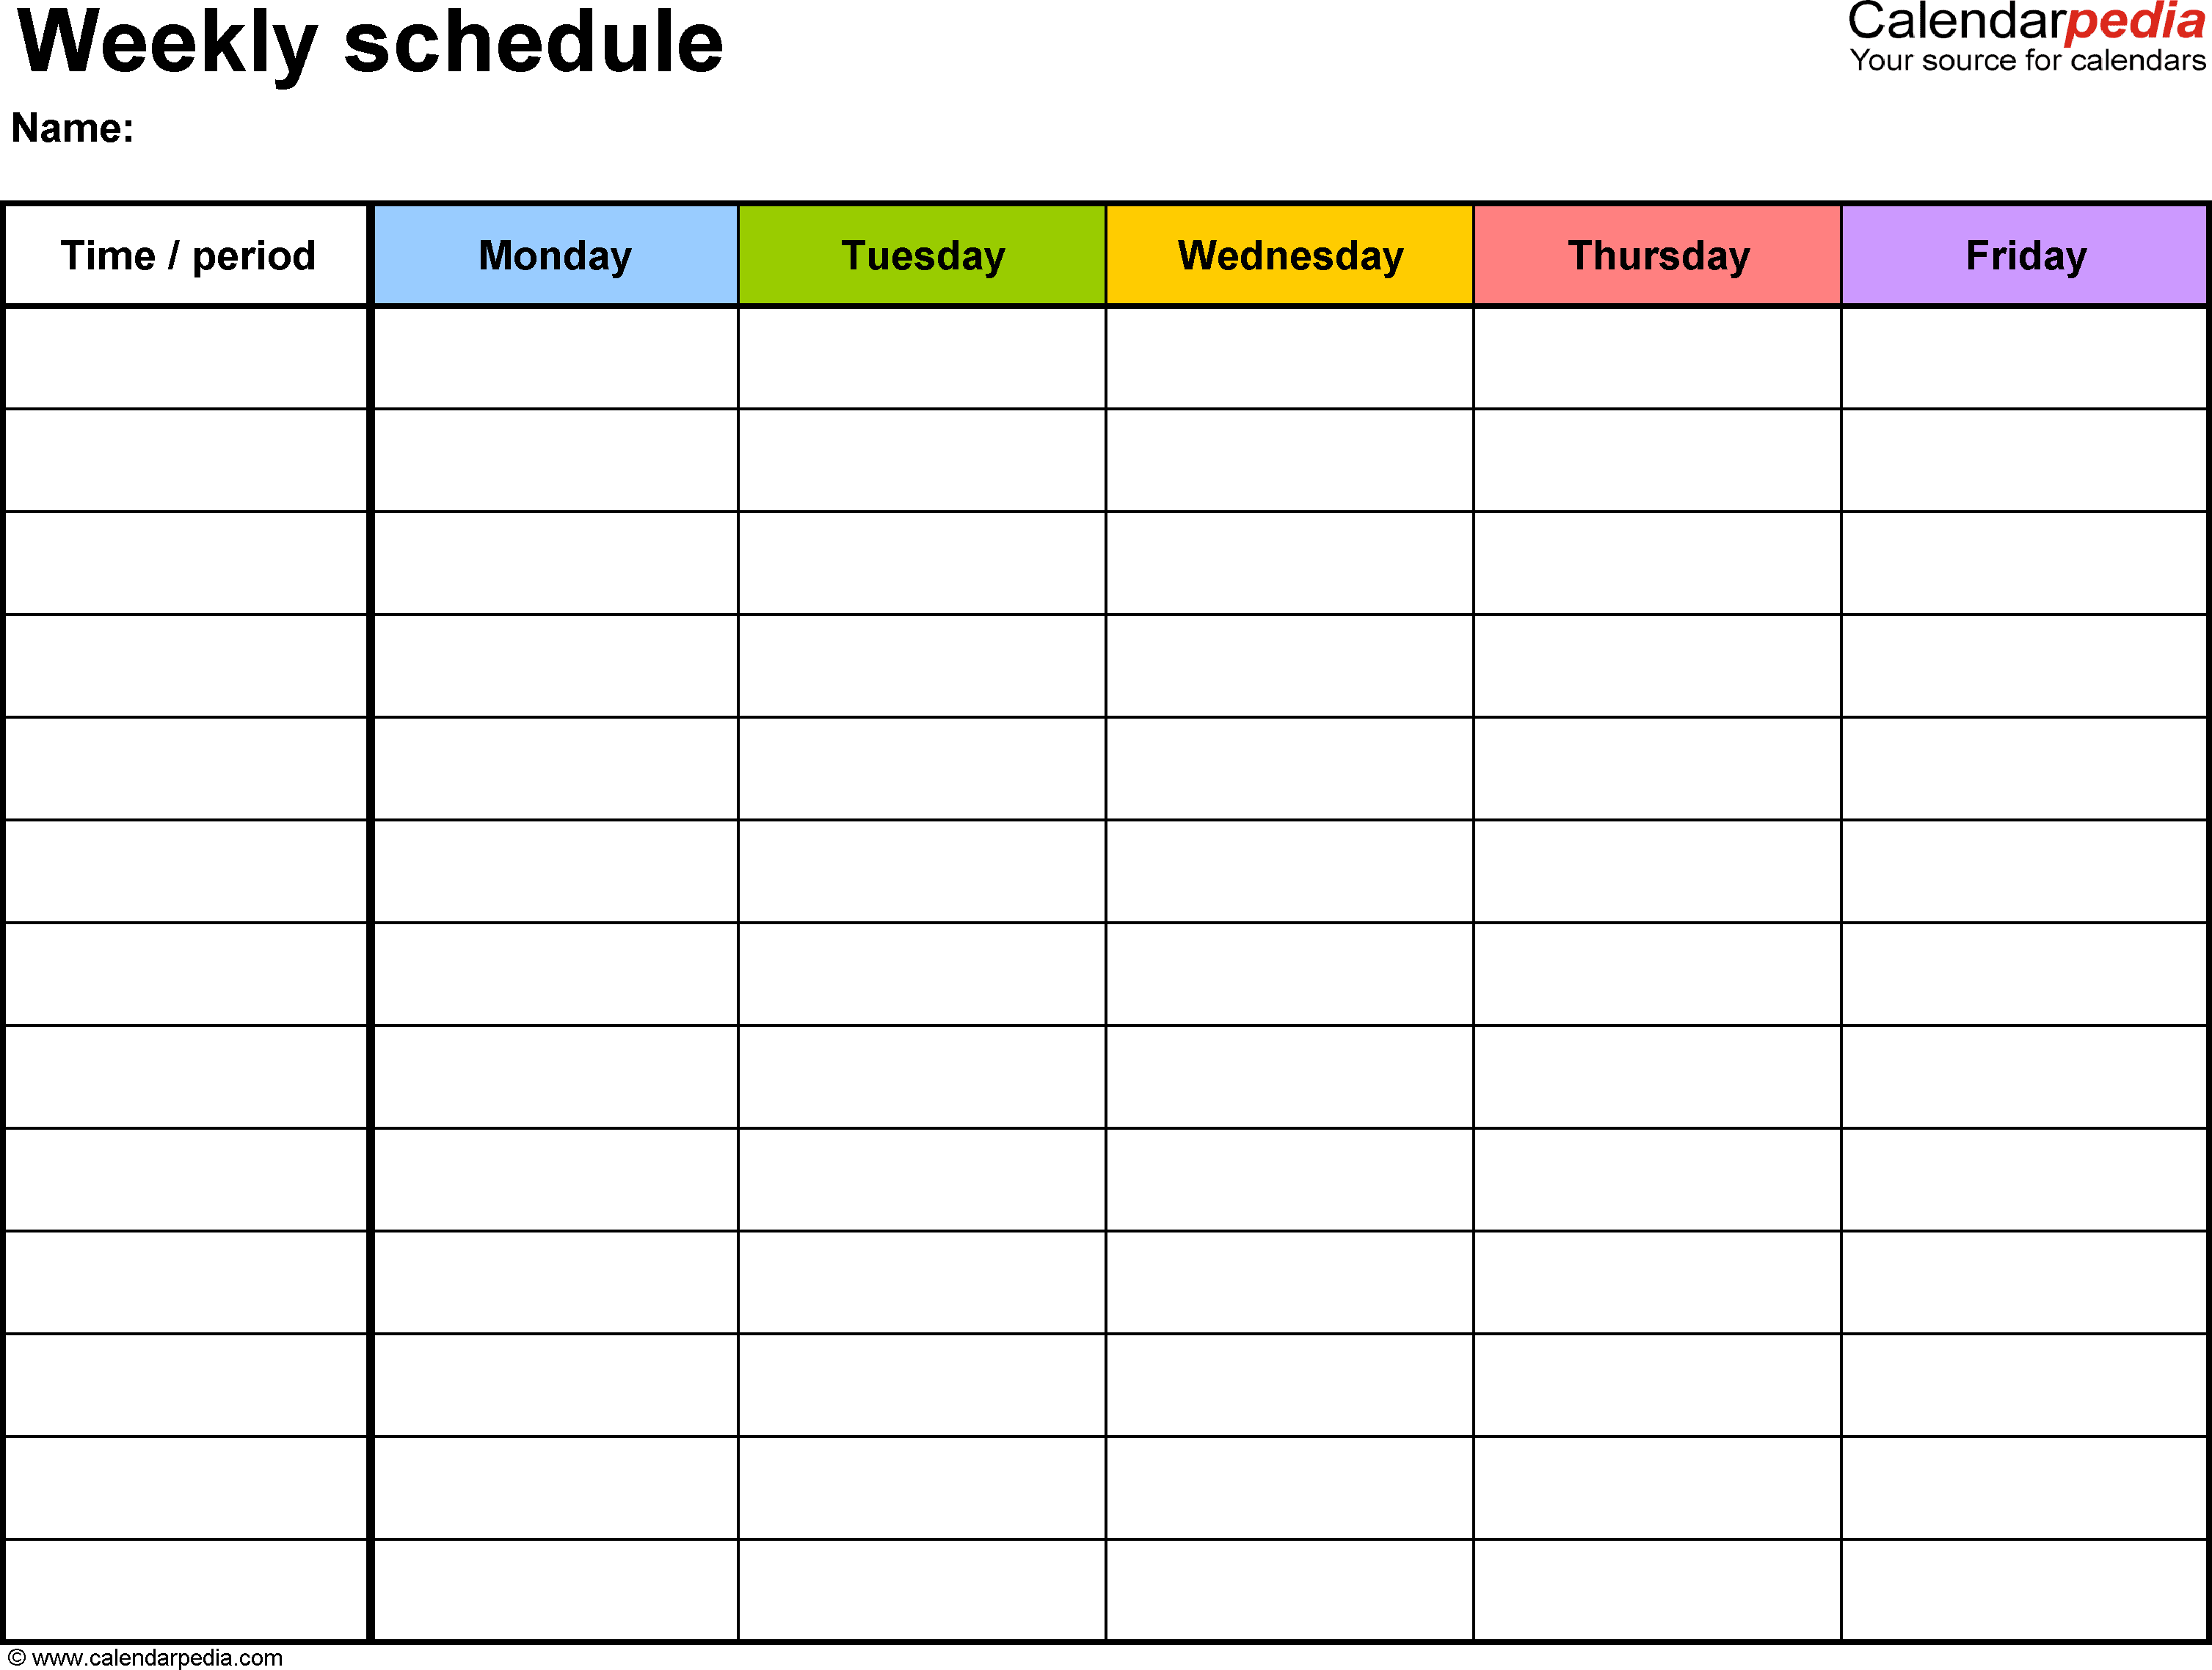 22 Online School Schedule Html Template Templates with School Inside Blank Html Templates Free Download